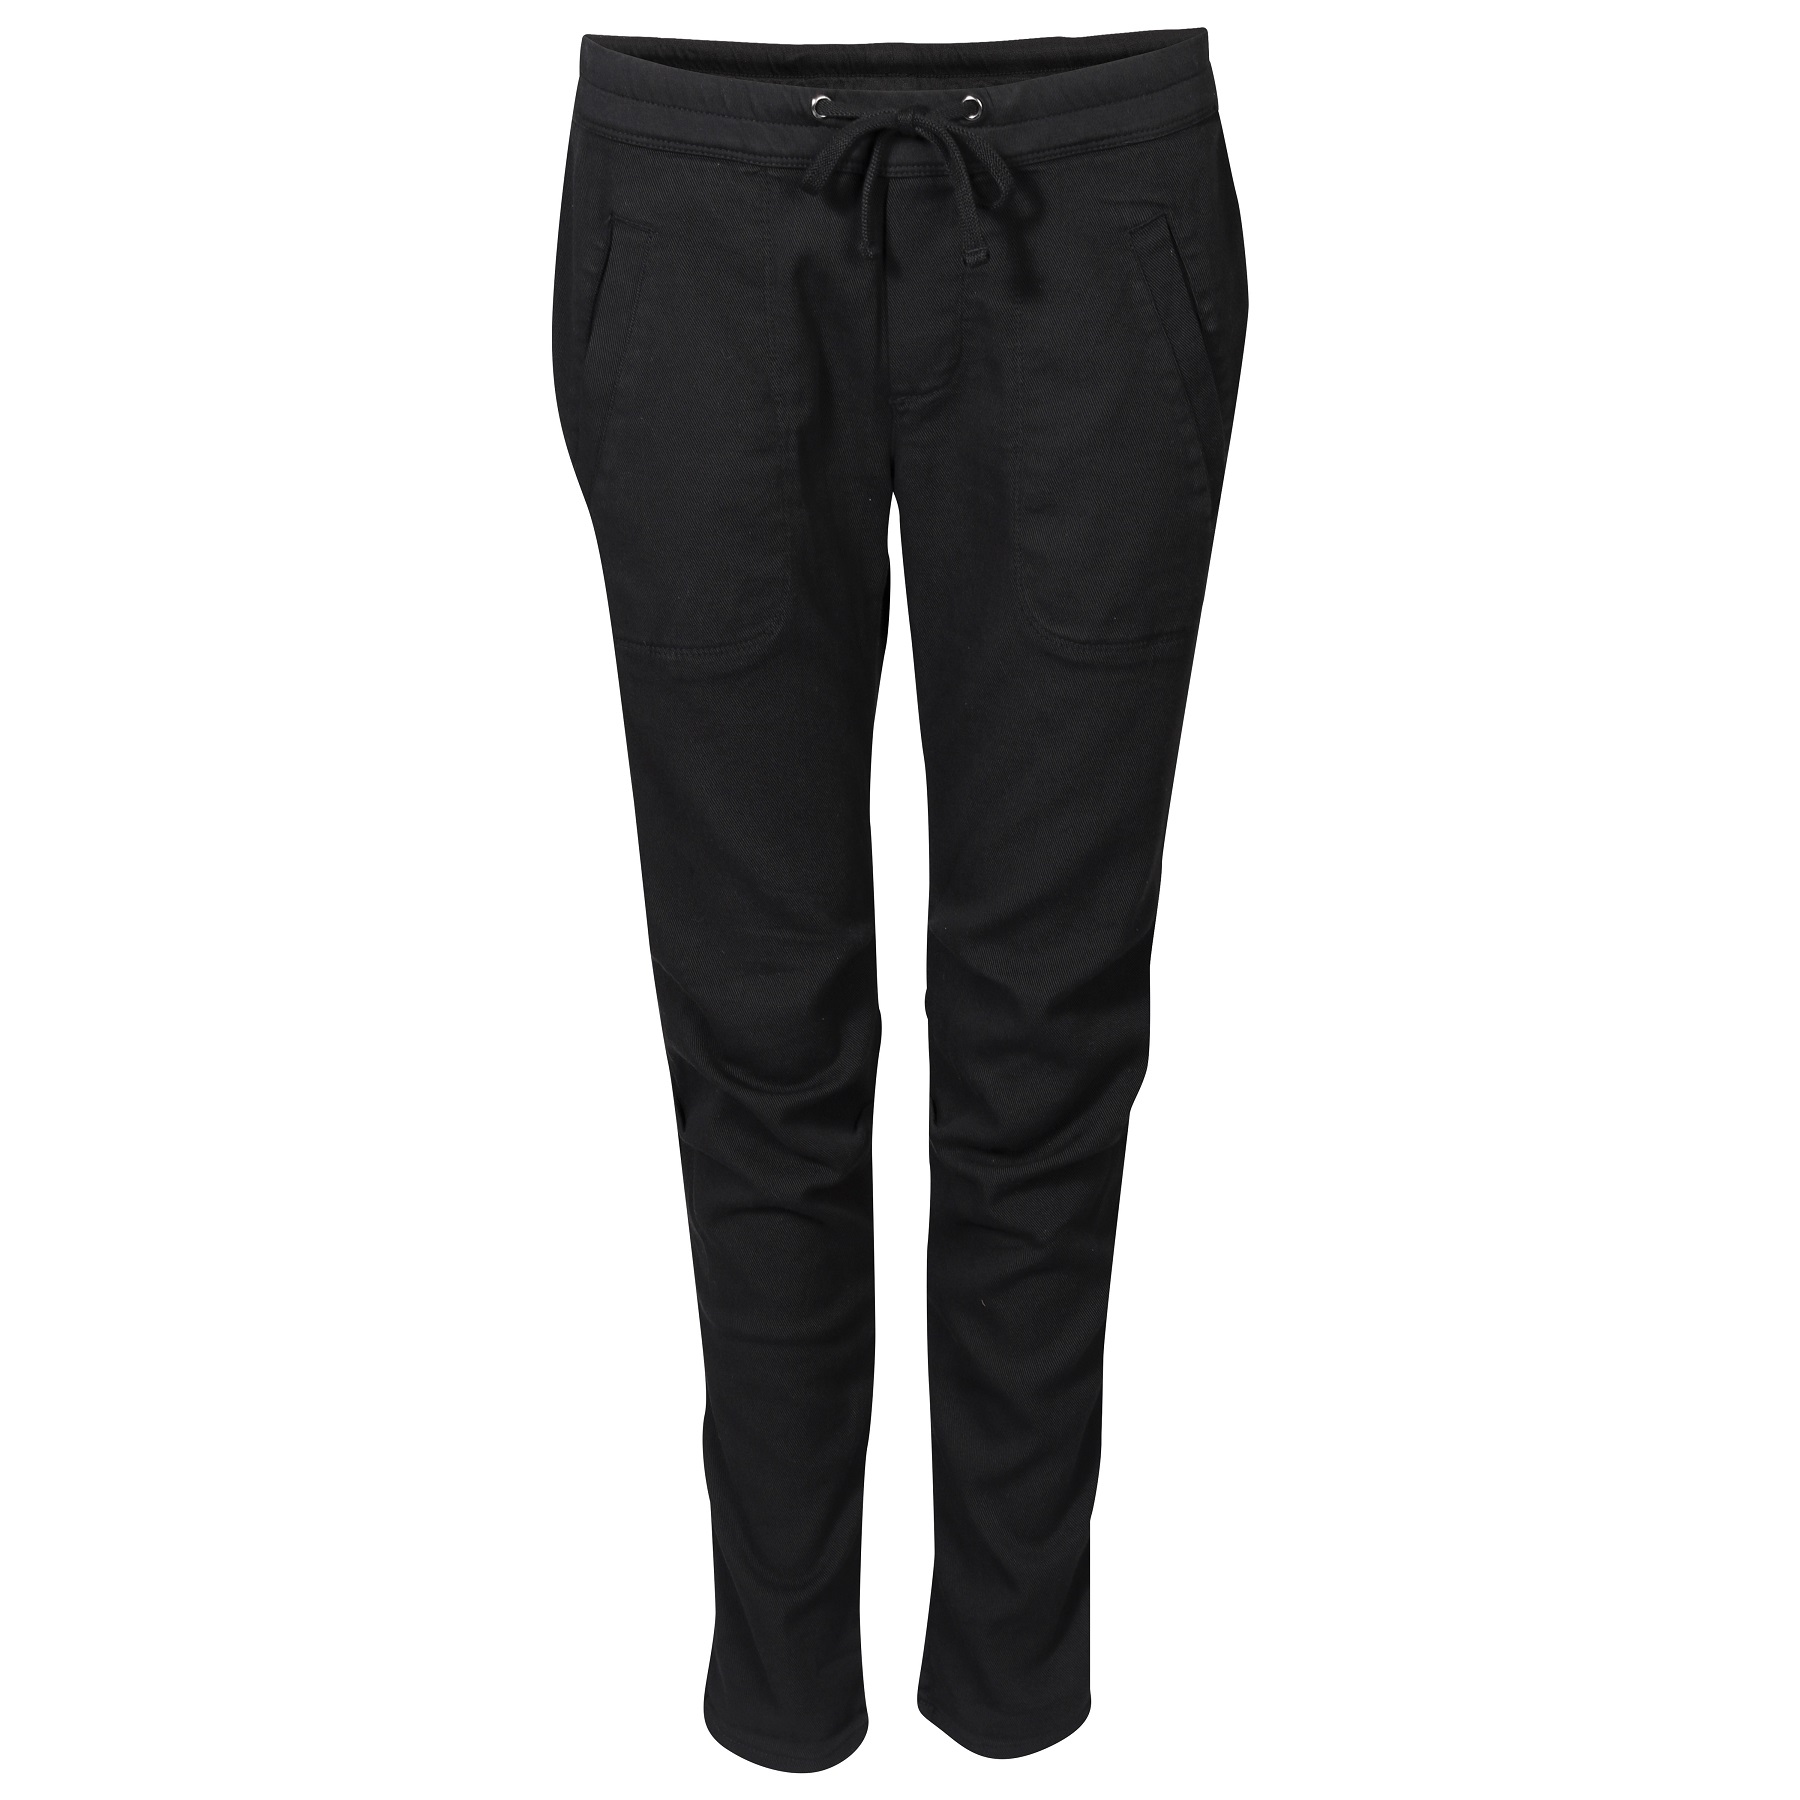 JAMES PERSE Soft Drape Utility Pant in Black